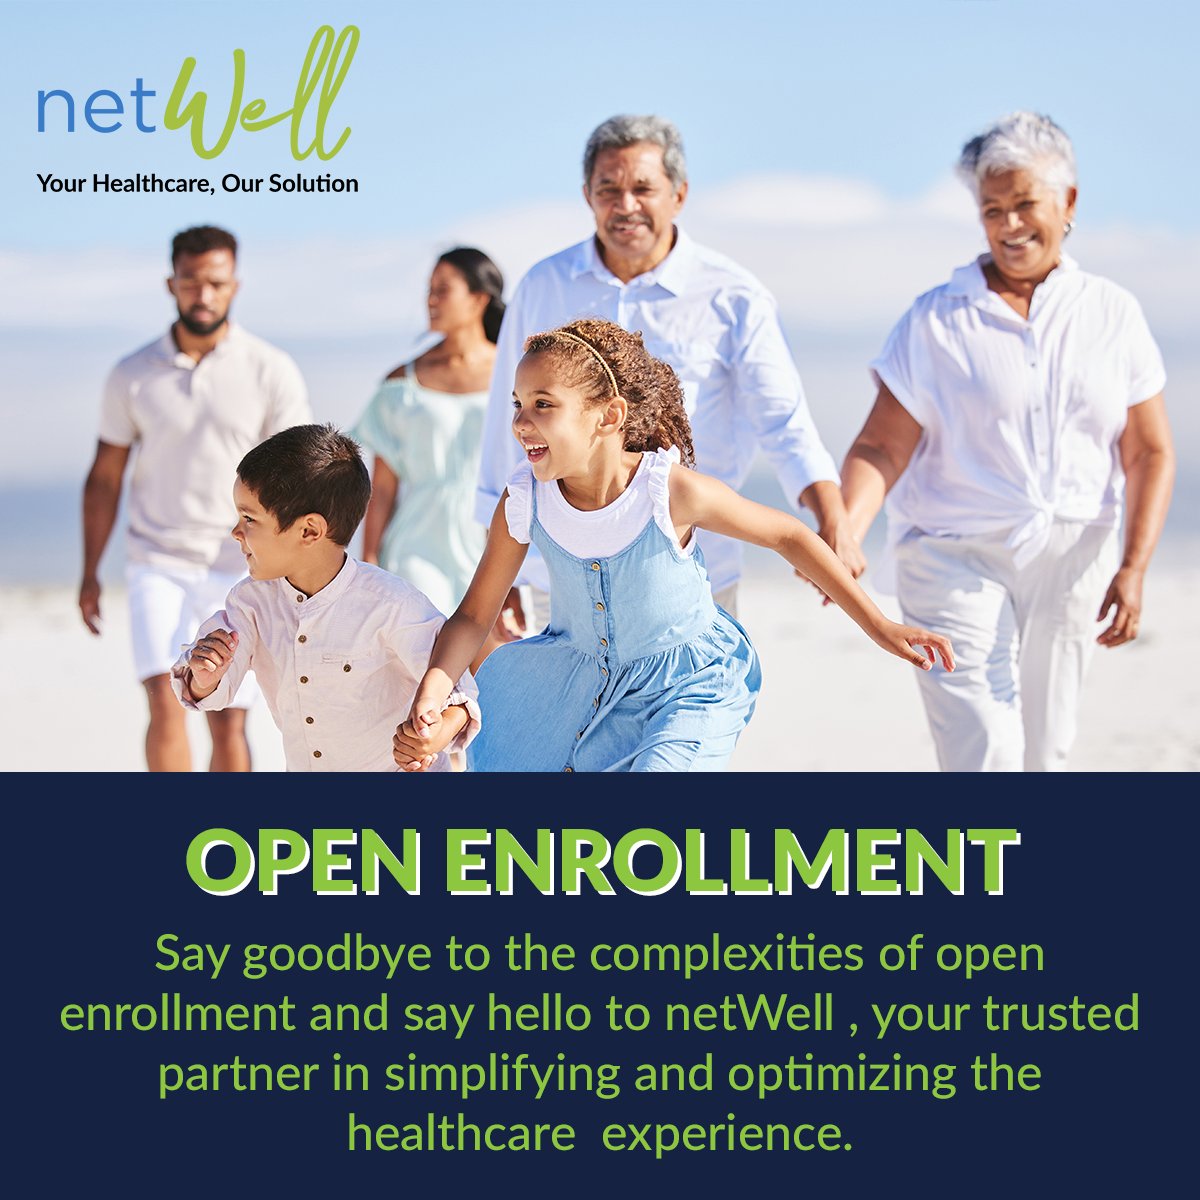 You still have time to check out your open enrollment options with netWell! Open Enrollment is ALWAYS available at netWell. 

Click the link in our bio to explore your options now. 💙🏥✨

#healthcaresharing #healthshare #community #family #healthcare #health #openenrollment2024